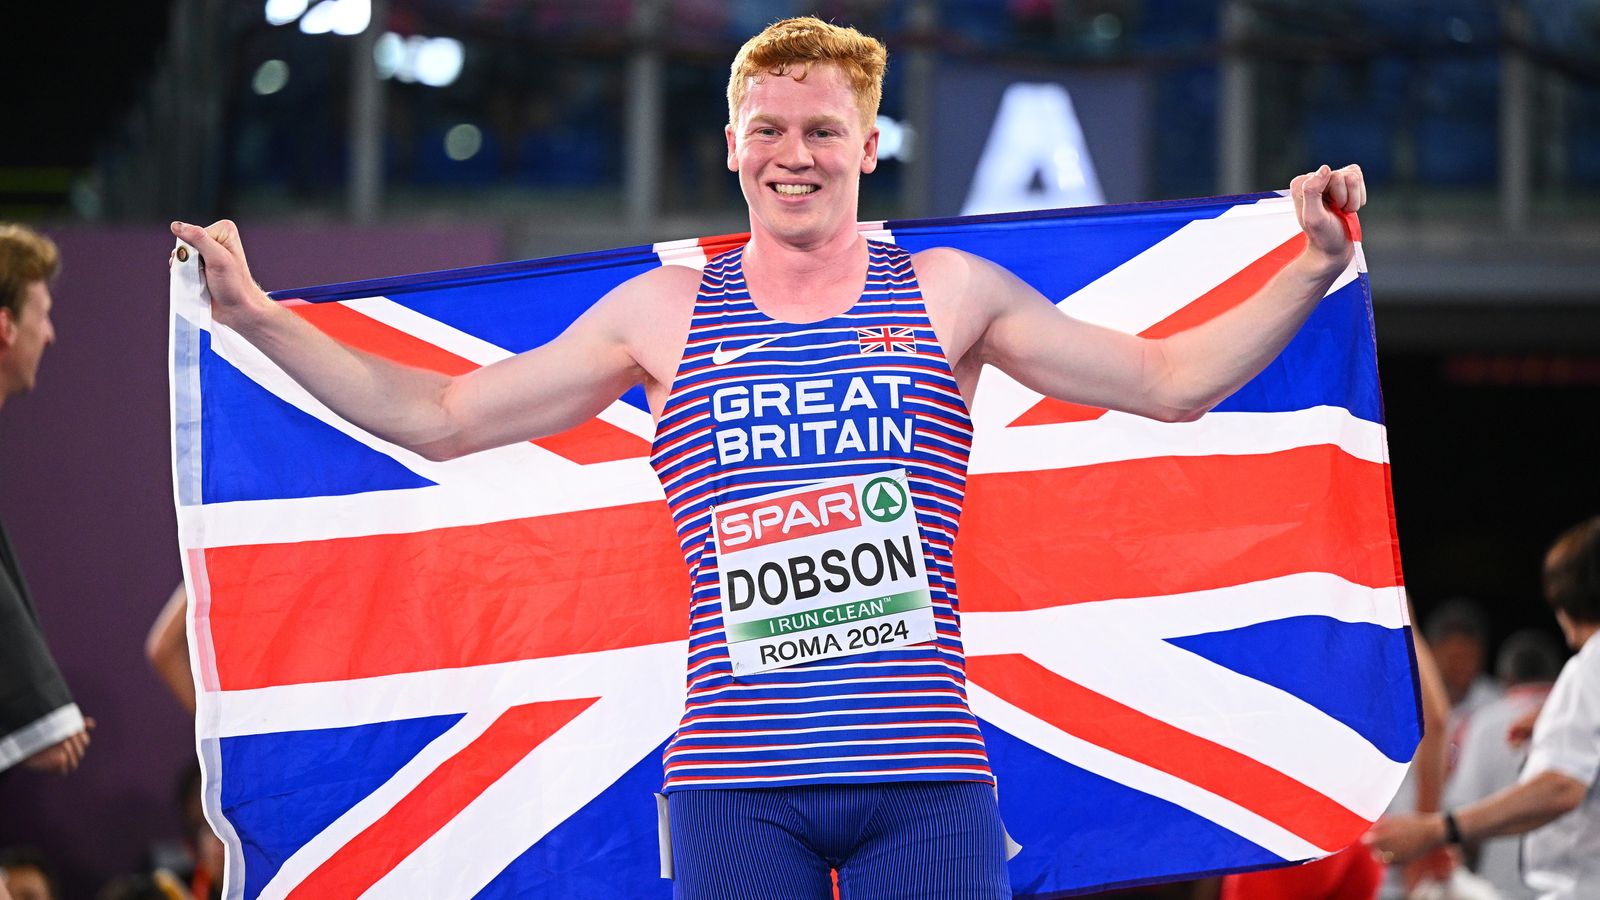 European Athletics Championships: Charlie Dobson and Molly Caudery on podium for Great Britain